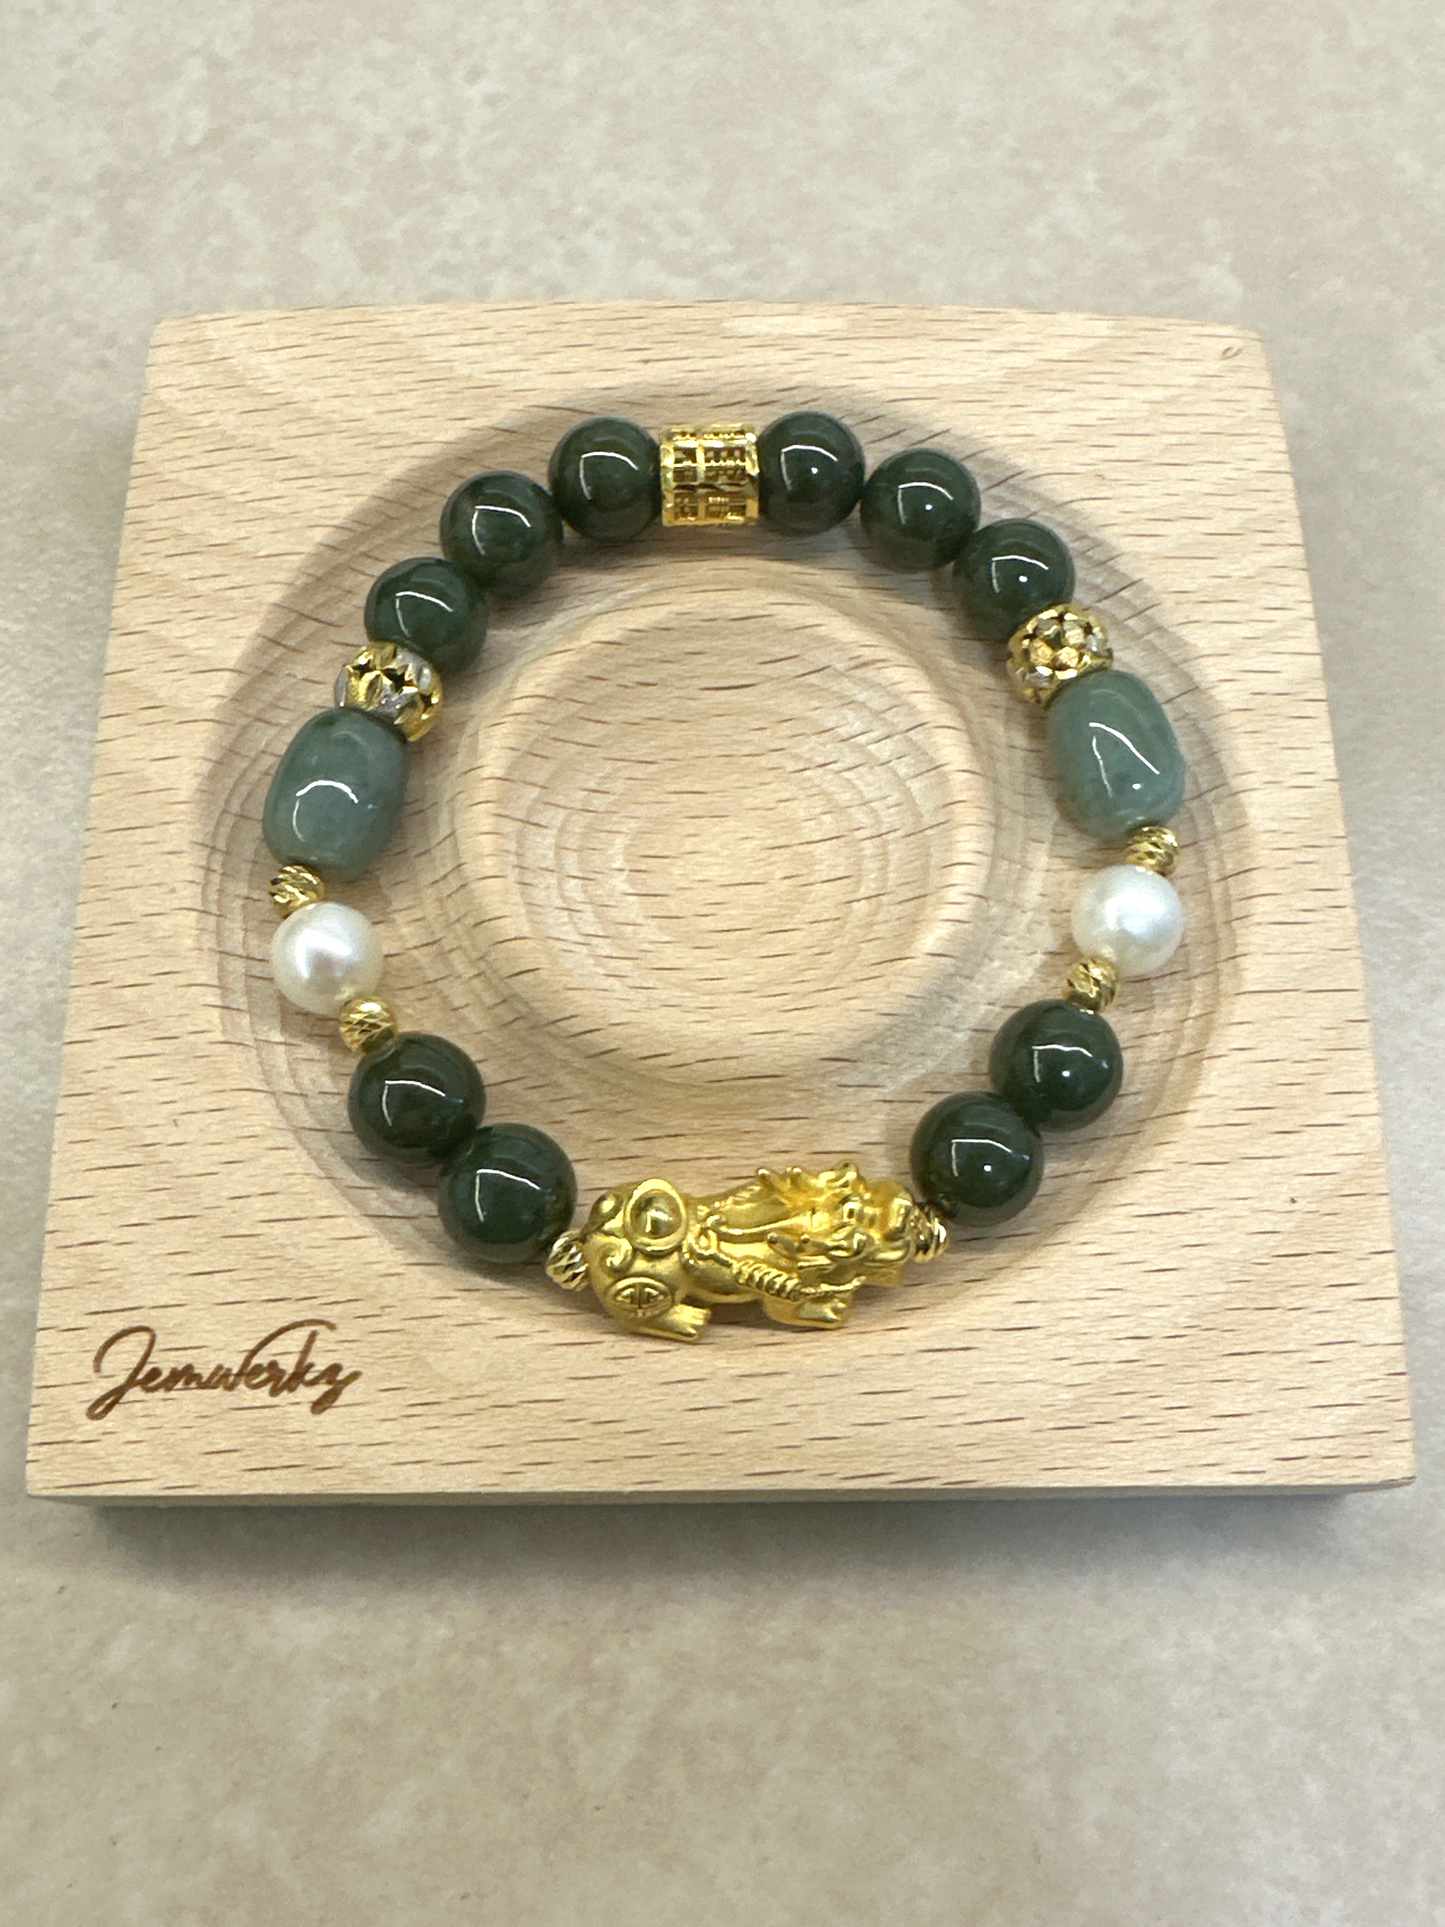 JORDANA GOLD 1.0 - 999 Pure Gold Pixiu with Jade Barrels, Jade, Freshwater Pearls and 916 Gold Spacers Bracelet